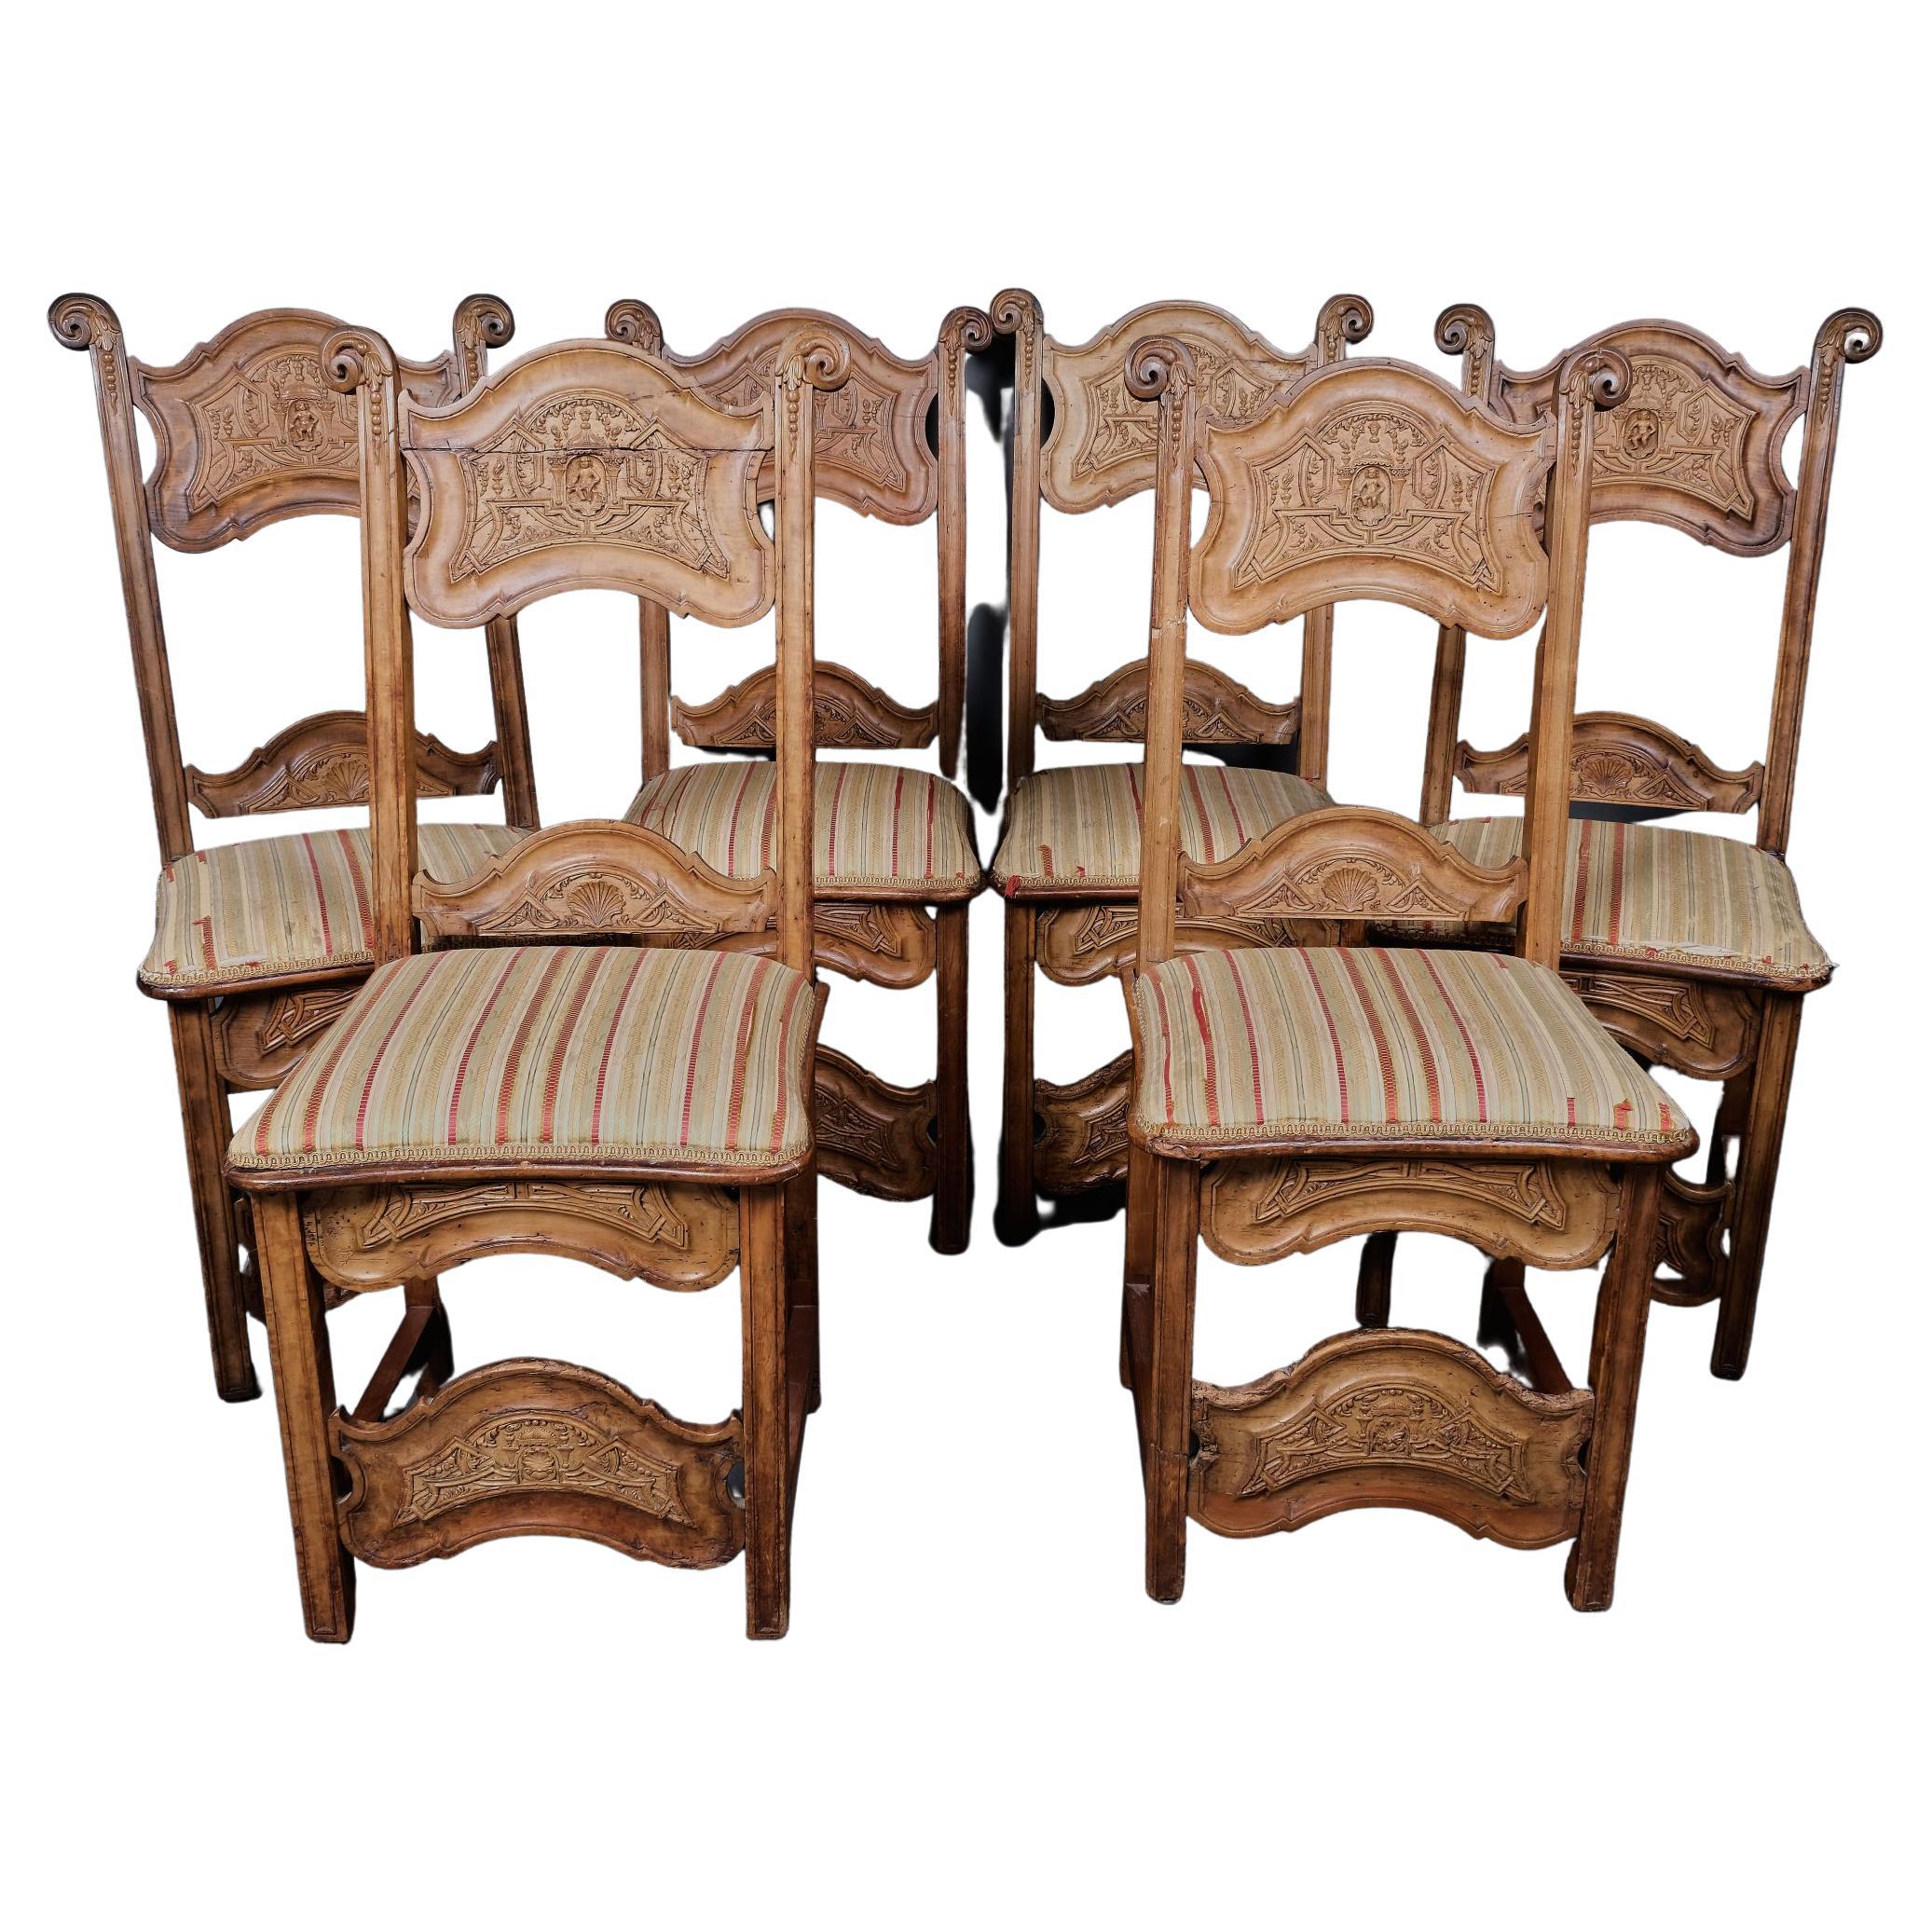 Rare Suite of Six Chairs, Prob. Lorraine, 18th Century